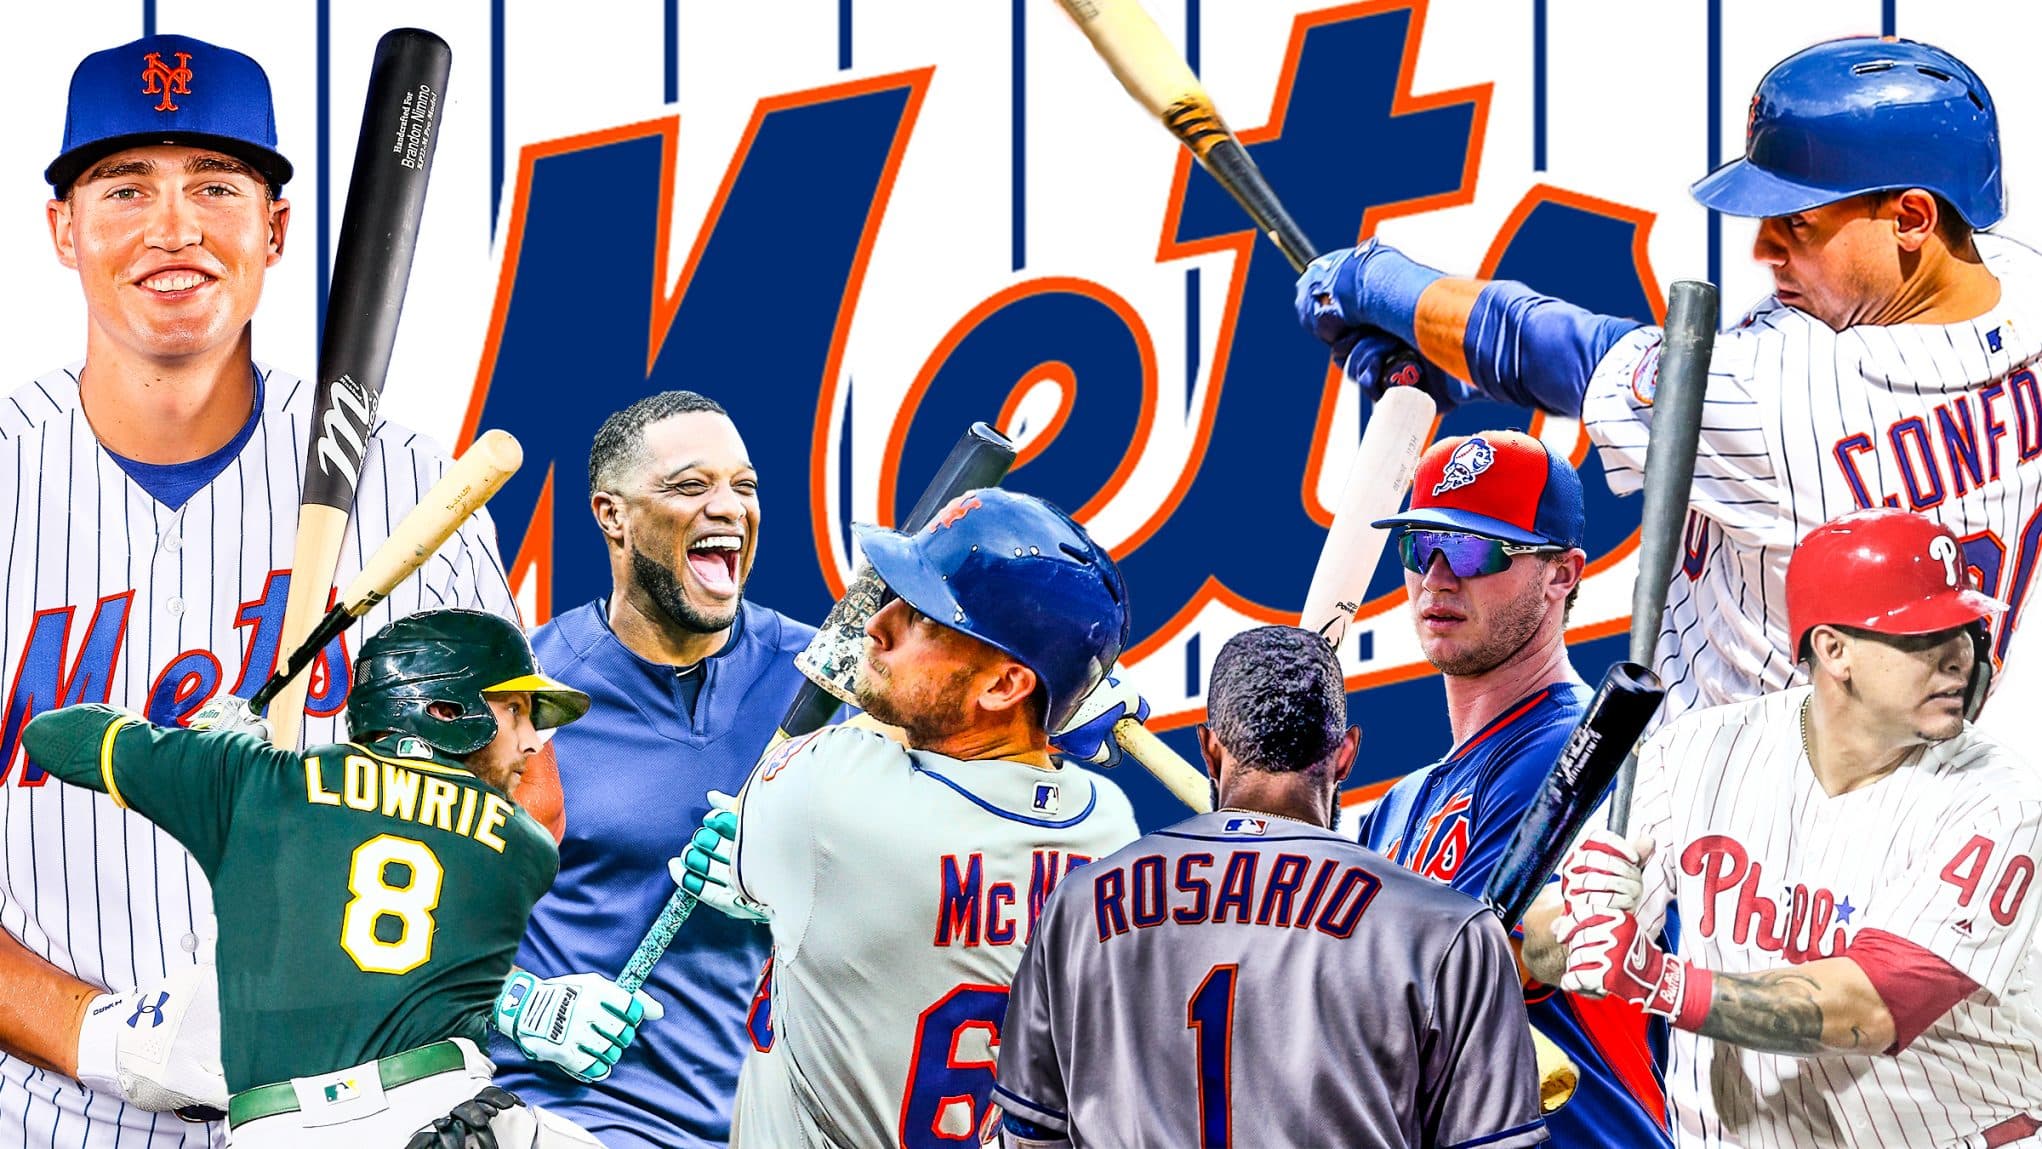 New York Mets - All-Star wallpapers for All-Star players.